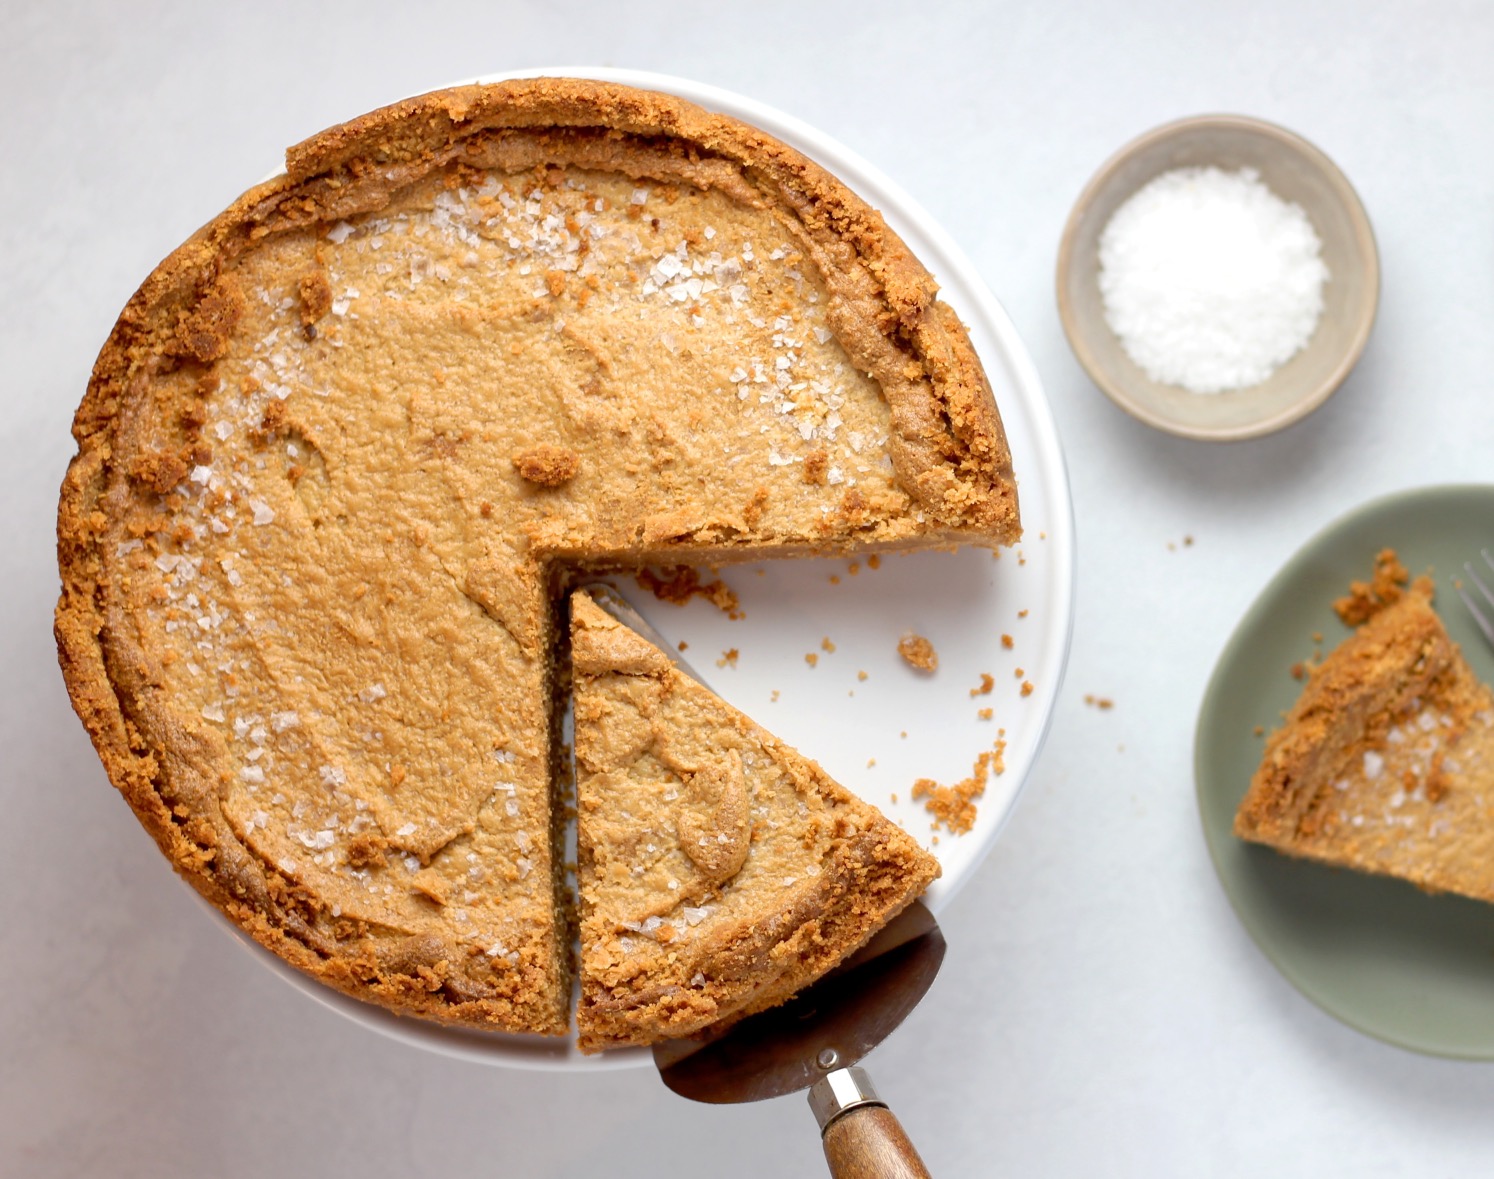 Tips for taking beautiful photos of pies that tell a story.